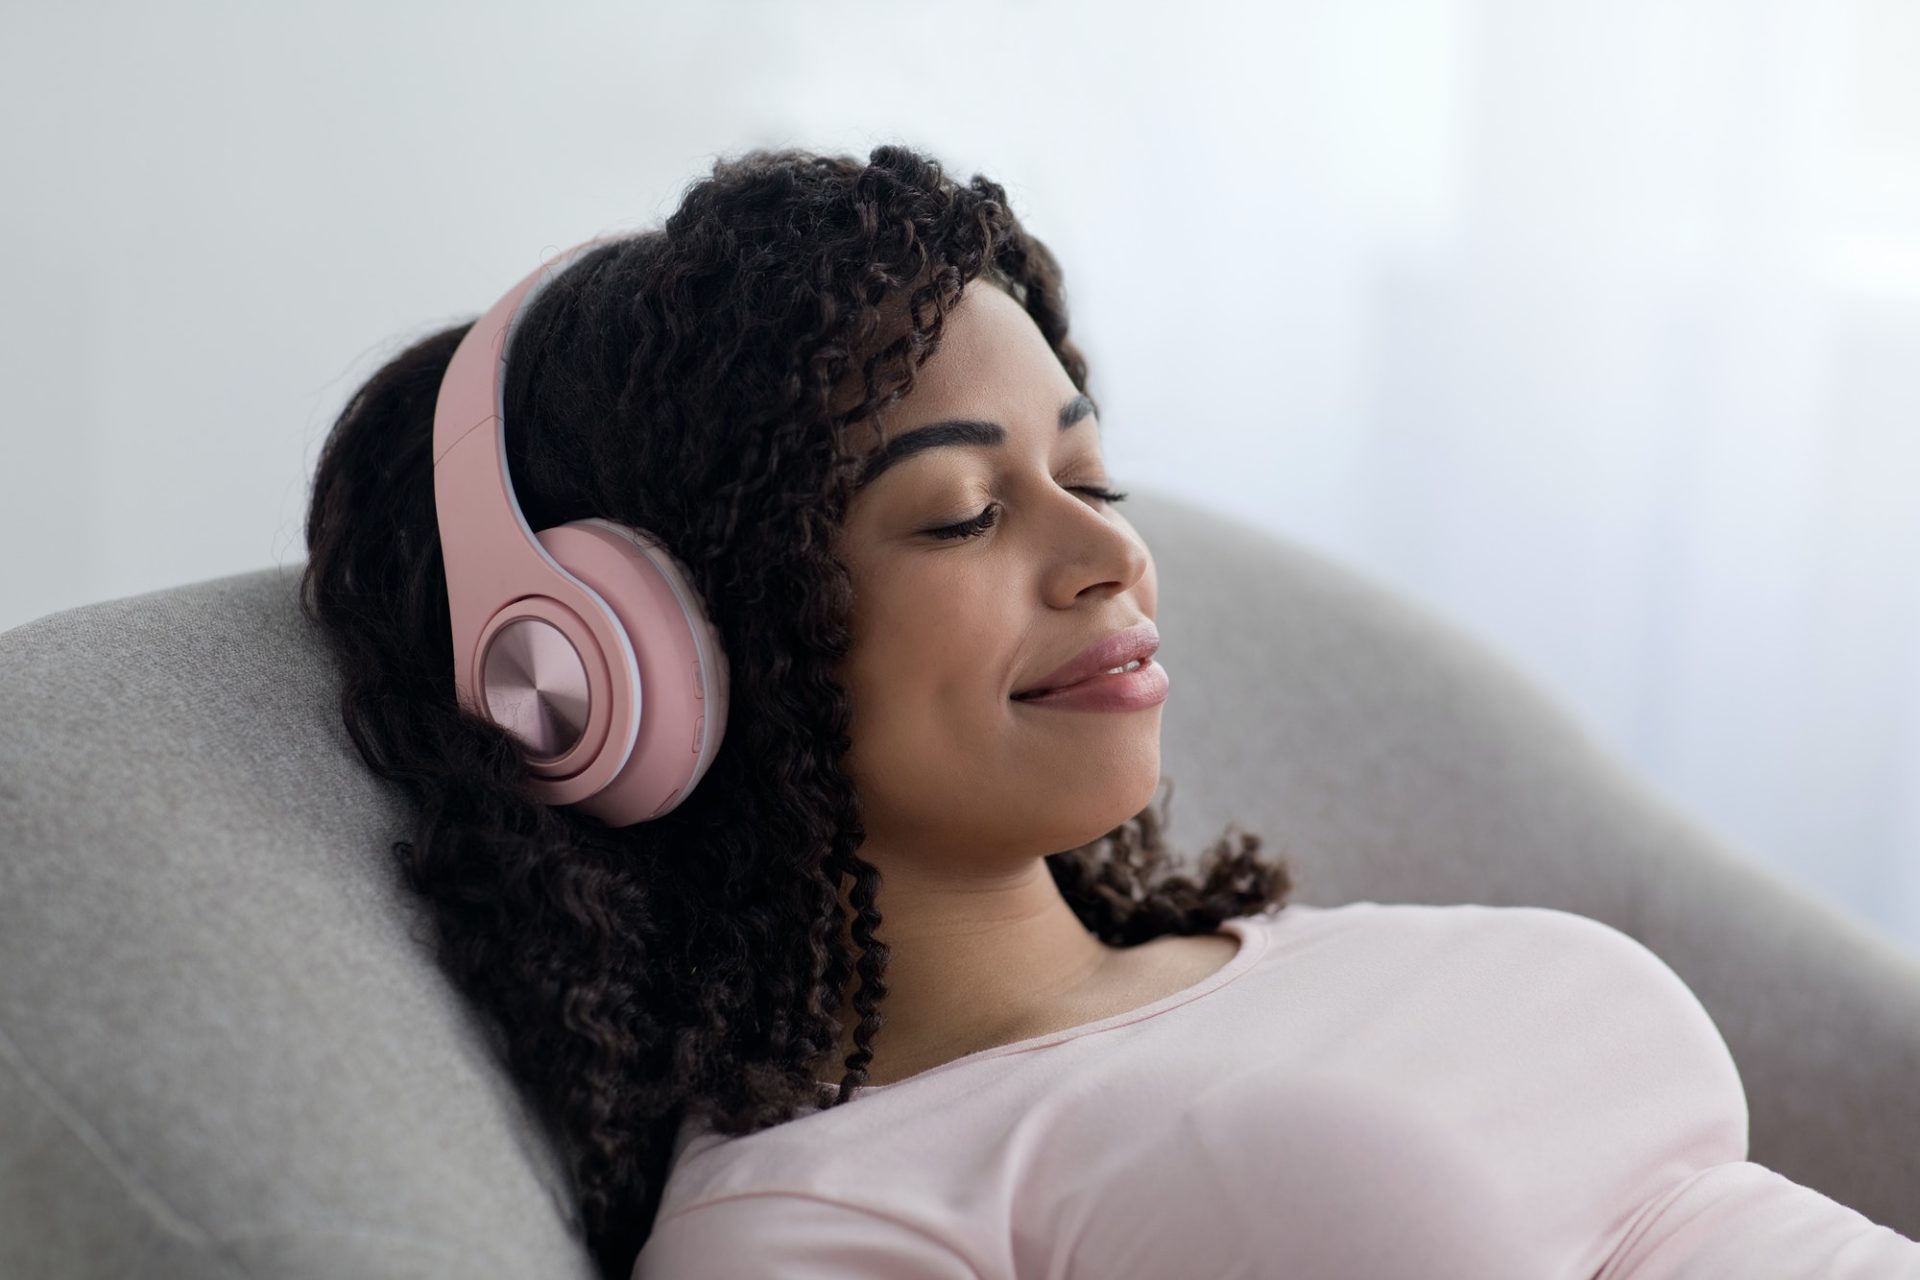 Peace of mind, listen favorite music, enjoy modern technology at home at spare time